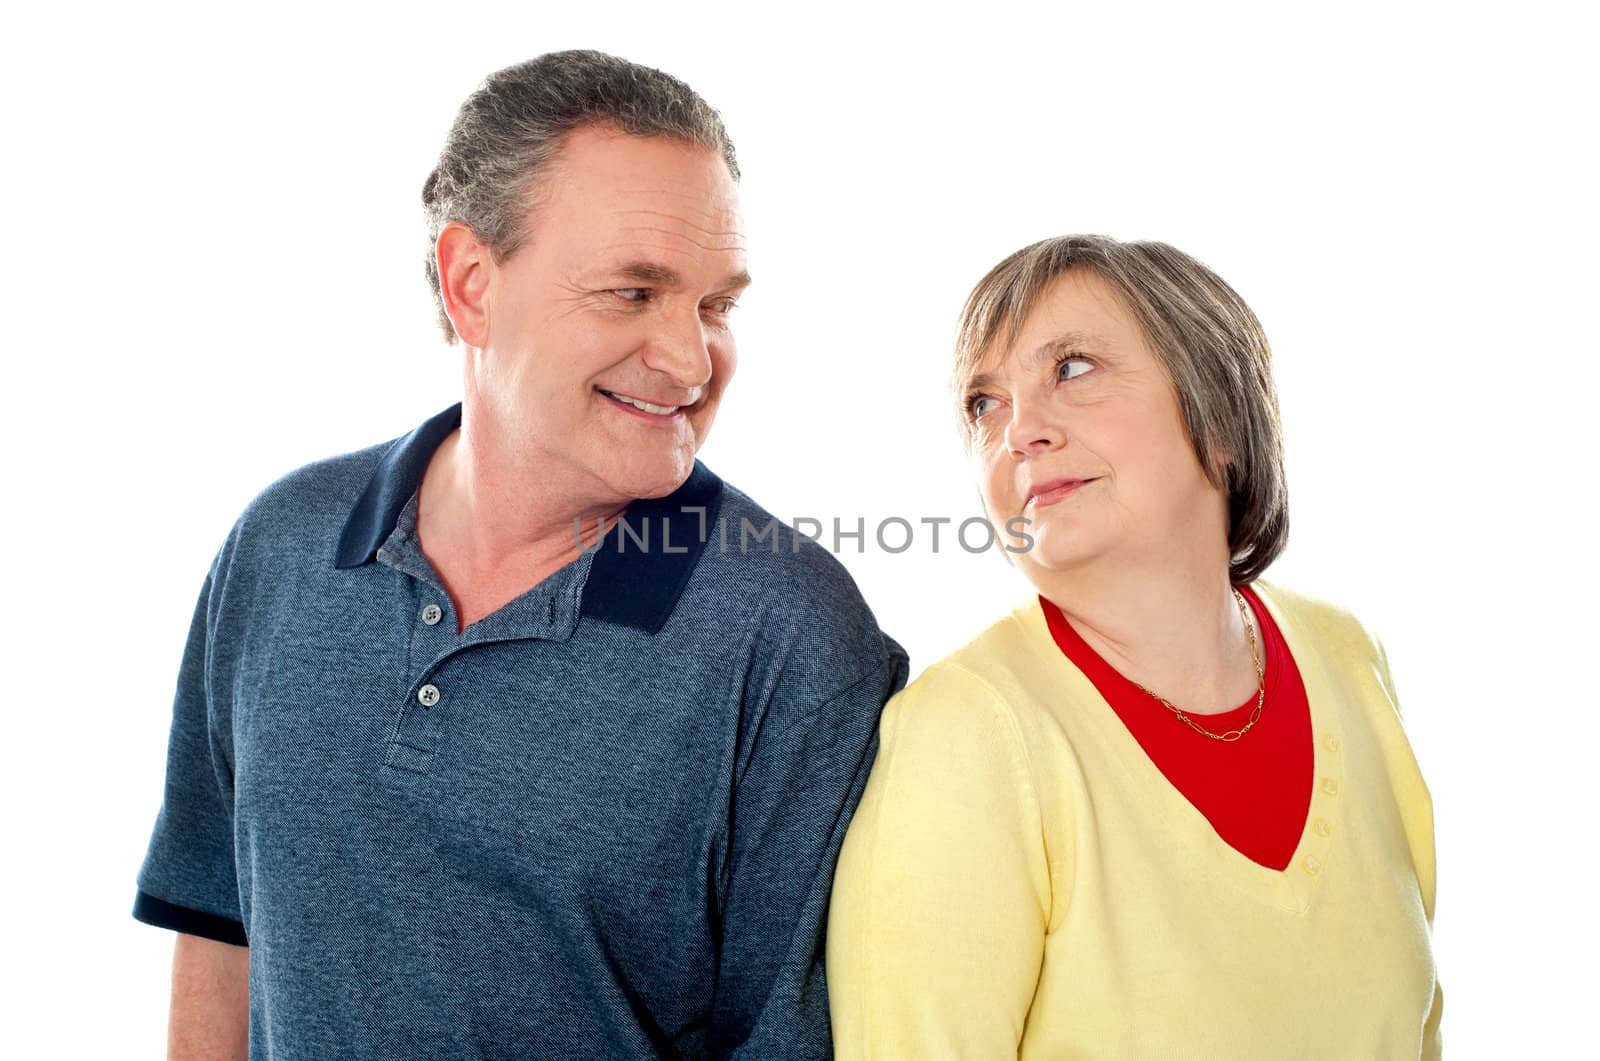 Attractive senior couple being playful. Posing back to back